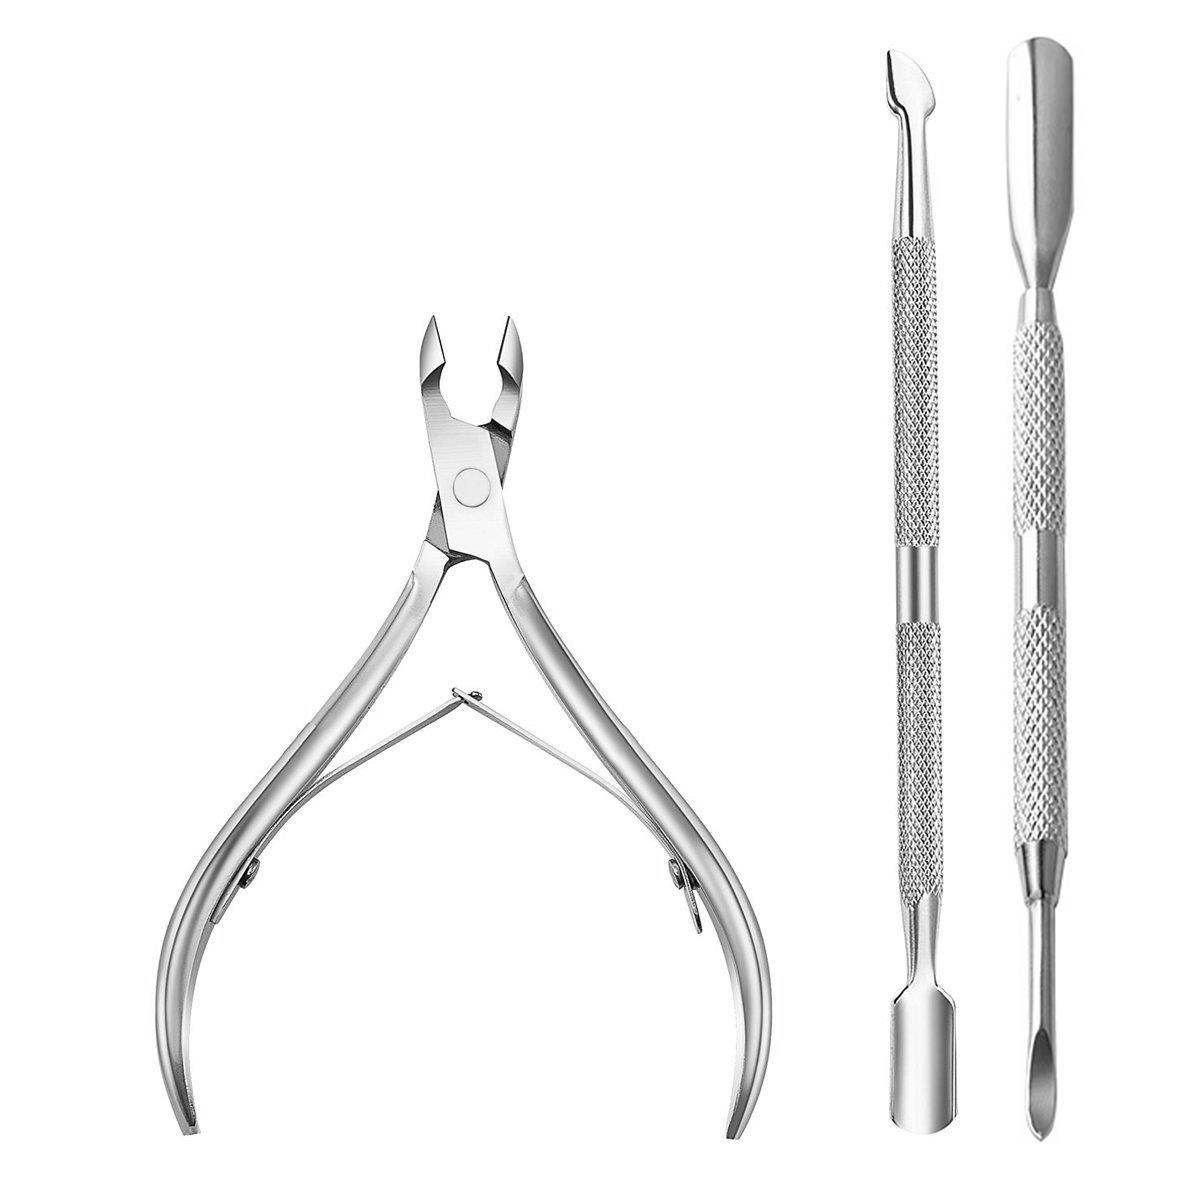 3pcs-Stainless-Steel-Nail-Cuticle-Spoon-Pusher-Remover-Cutter-Nipper-Clipper-Set-1021003